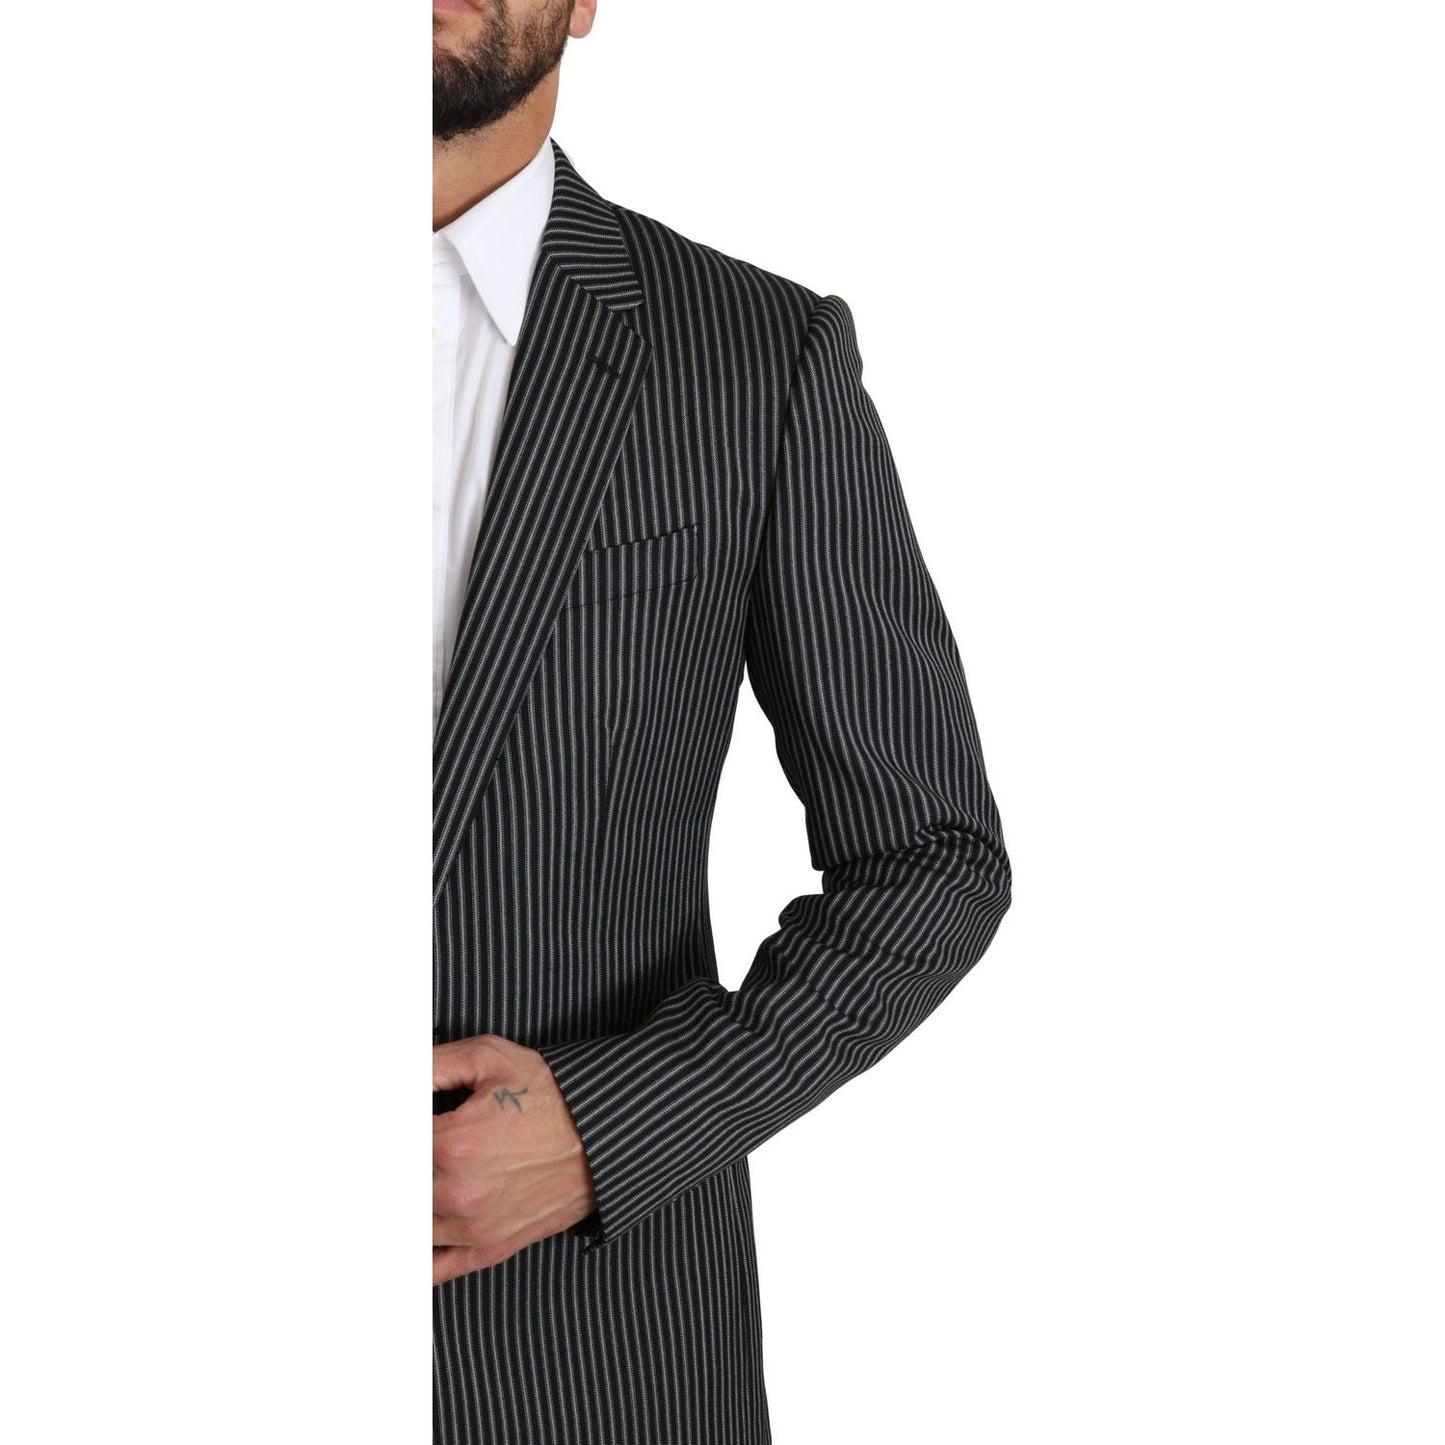 Dolce & Gabbana Elegant Striped Wool-Silk Two-Piece Suit black-white-stripes-2-piece-martini-suit Suit IMG_0376-scaled-9361c6f2-087.jpg